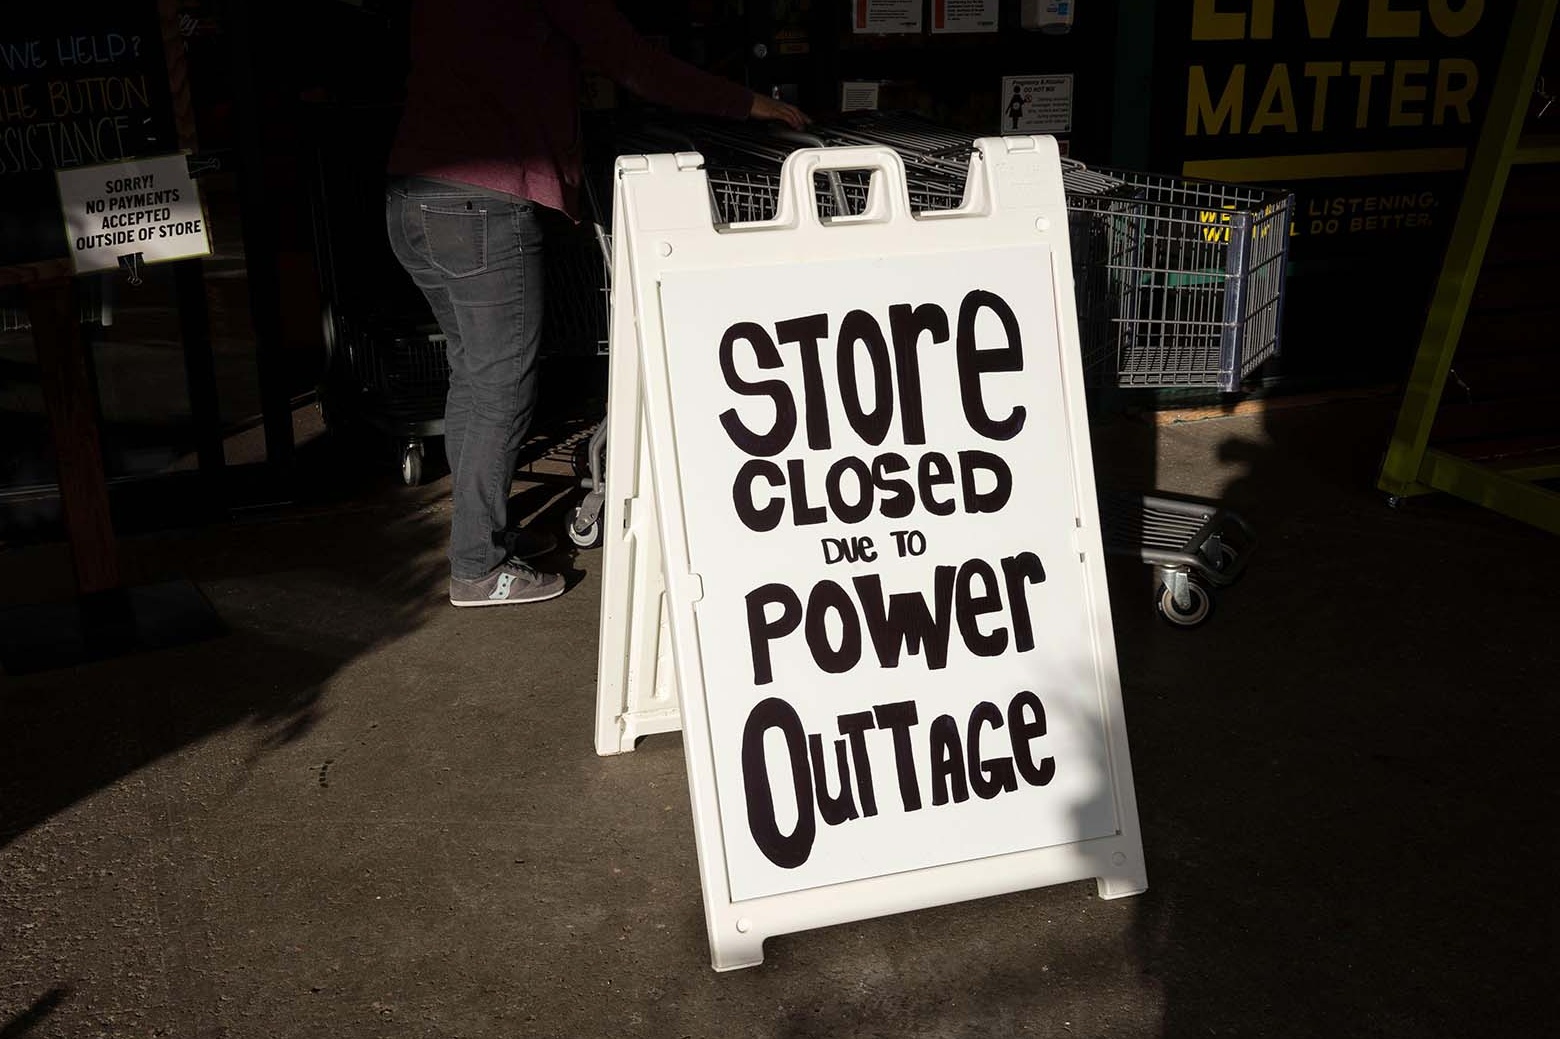 Many businesses in South Africa have had to drastically curb opening hours due to blackouts.